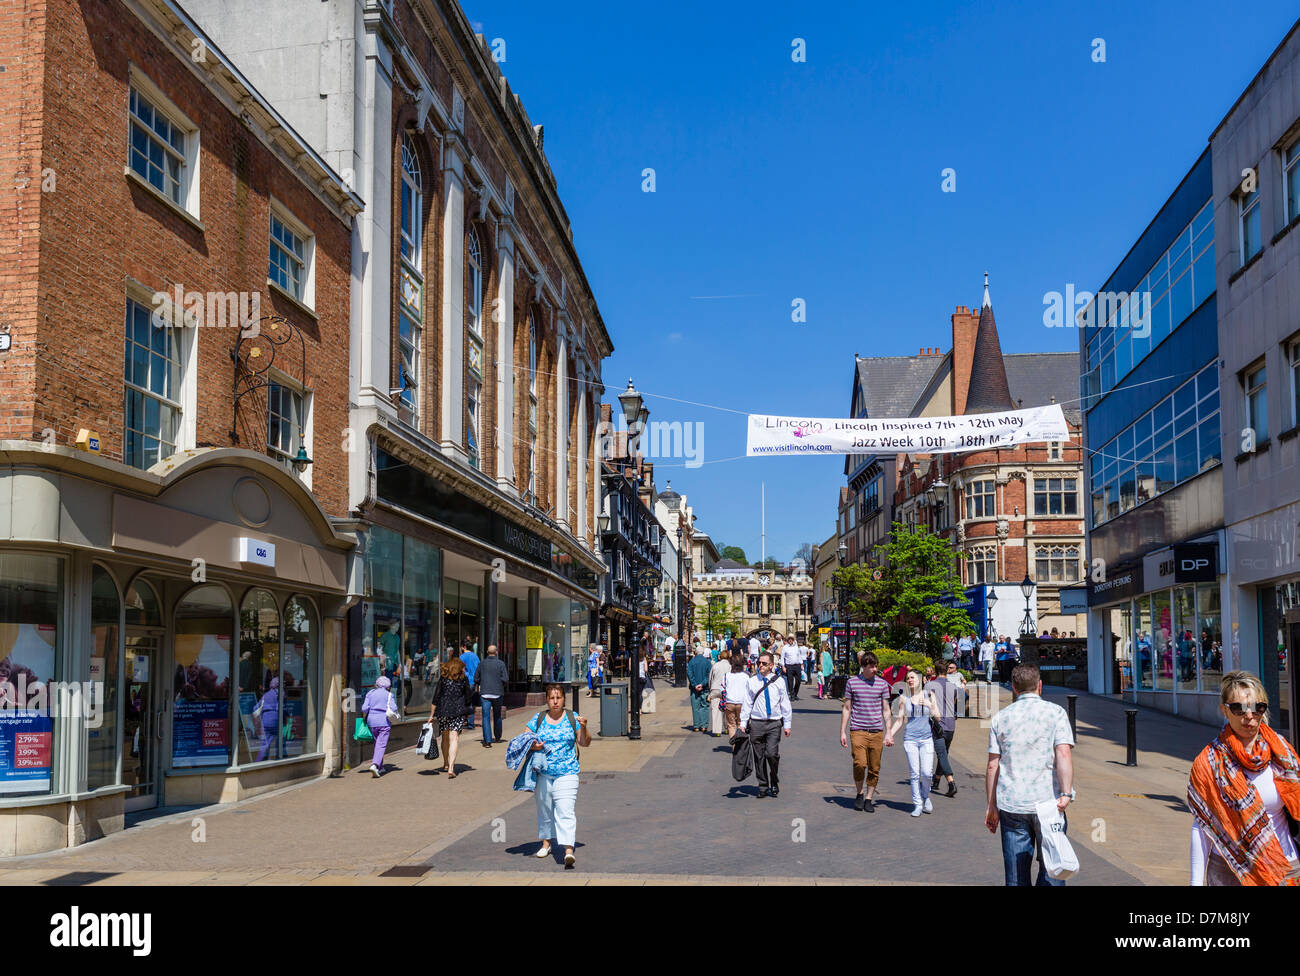 The High Street in the city centre, Lincoln, Lincolnshire, East Midlands, England, UK Stock Photo